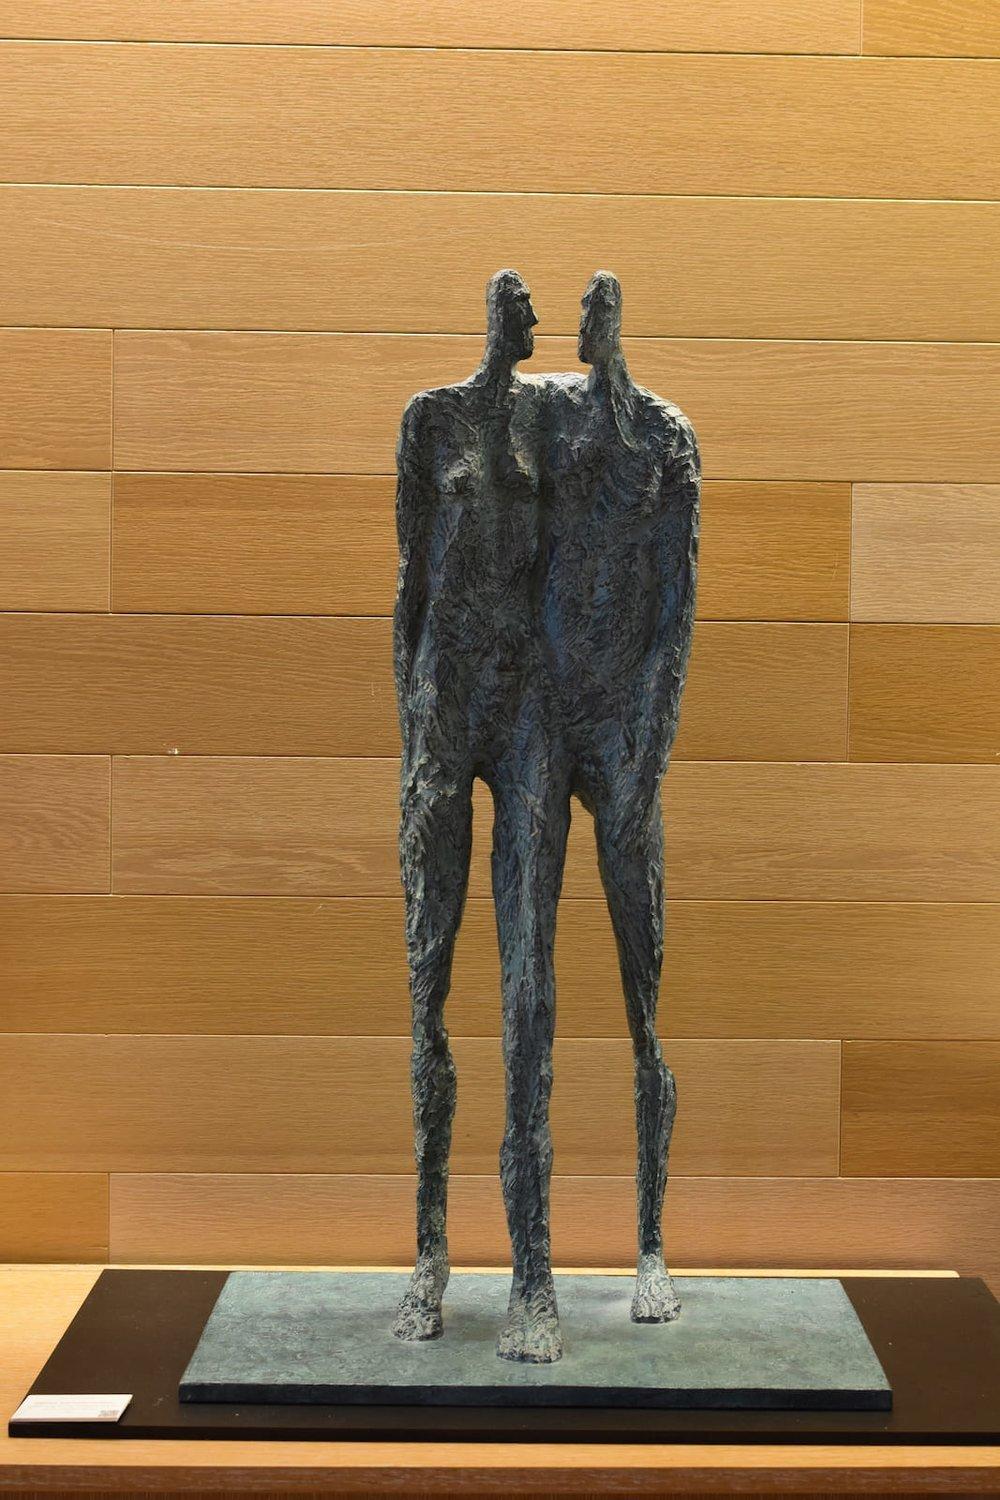 This work is a bronze sculpture by Martine Demal which dimensions are 88 x 55 x 30 cm (4.6 × 21.7 × 11.8 in). It weighs 20 kg and is part of a limited edition of 8 editions and 4 artist's proof. It is sold signed and numbered and comes with a